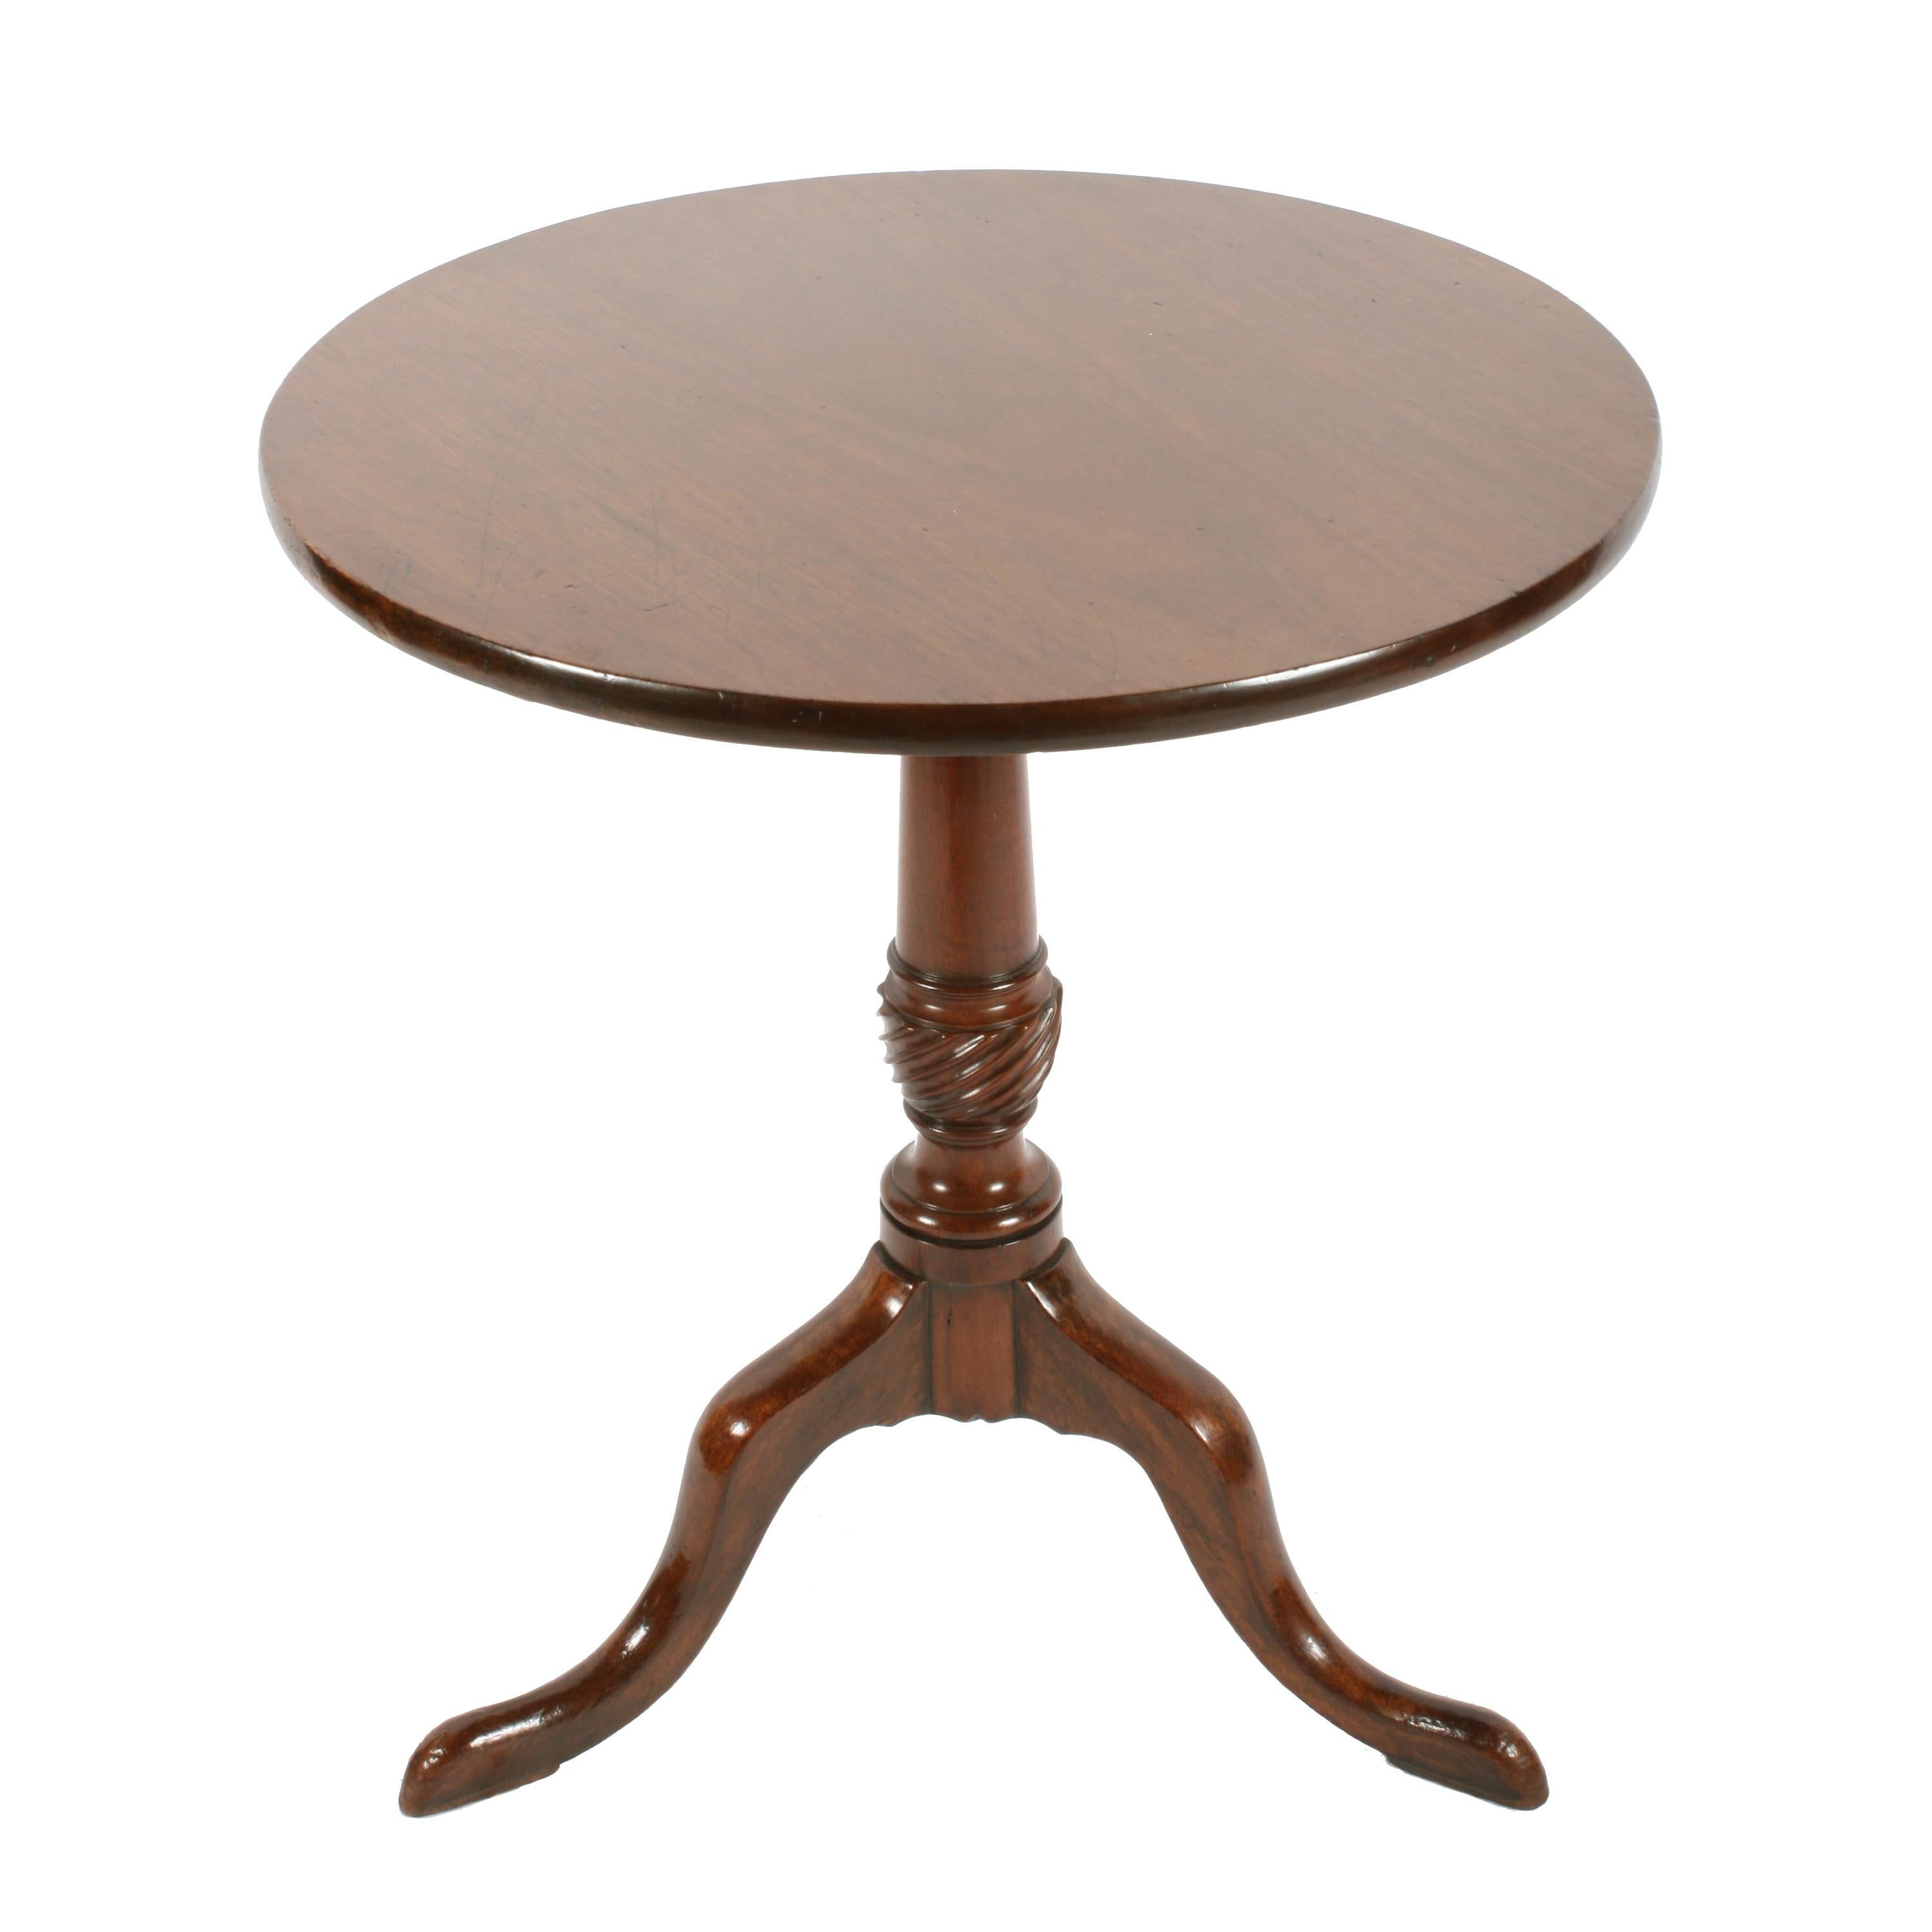 18th century mahogany lamp table


A late 18th century Georgian mahogany tip top lamp table.

The table has a tripod base with three cabriole legs that have pad feet, the centre stalk is turned and tapering with a spiral carved urn at its